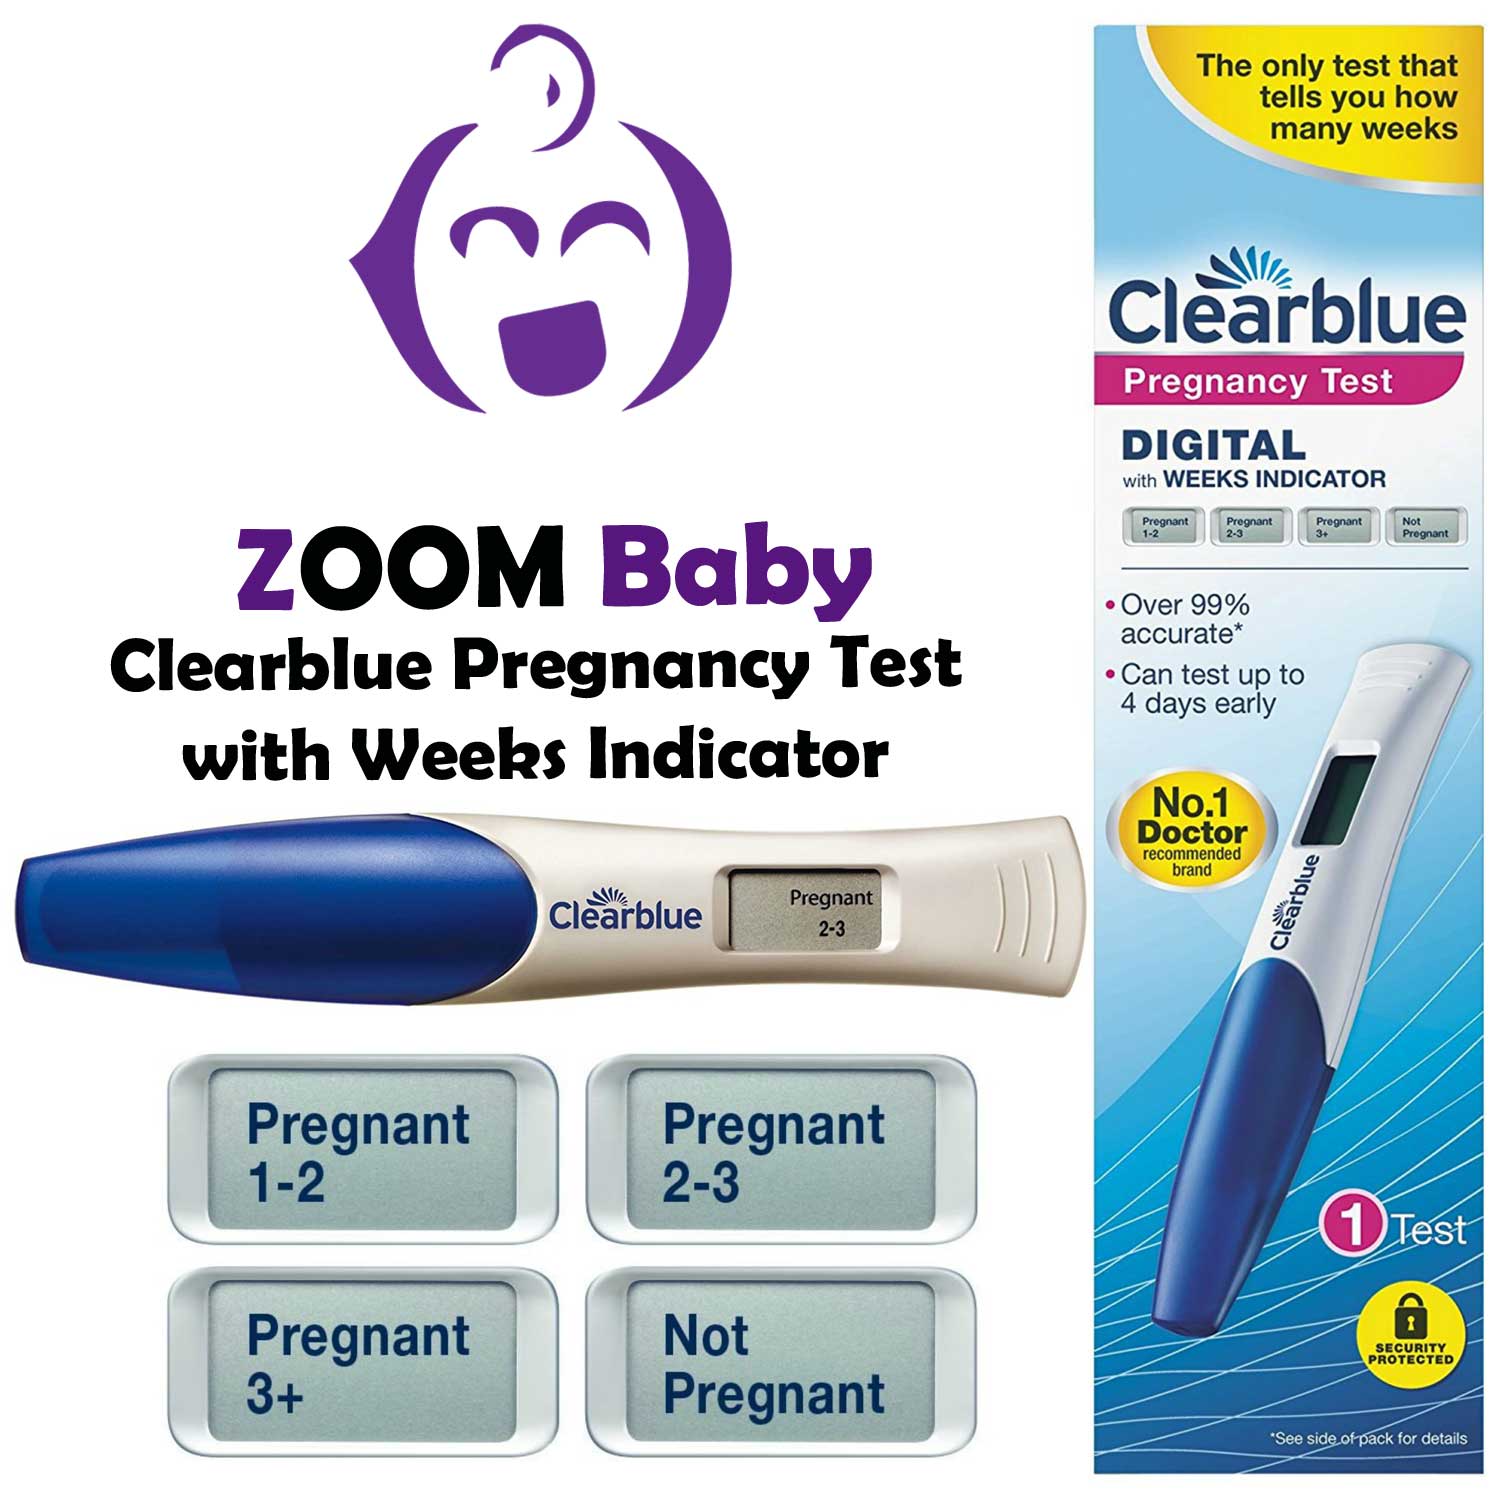 Clearblue Digital Pregnancy Test with Weeks Indicator - Zoom Baby